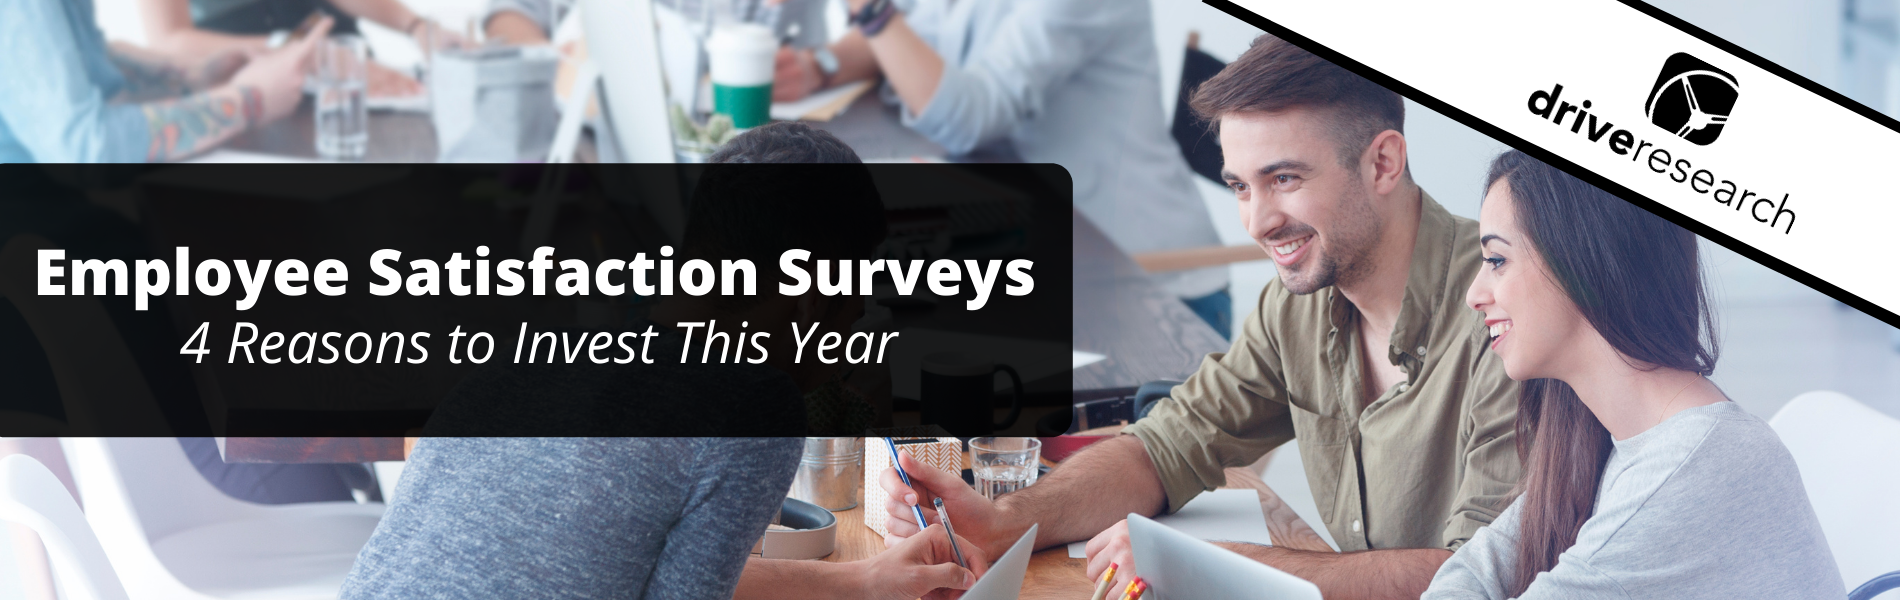 Employee Satisfaction Surveys - 4 Reasons to Invest